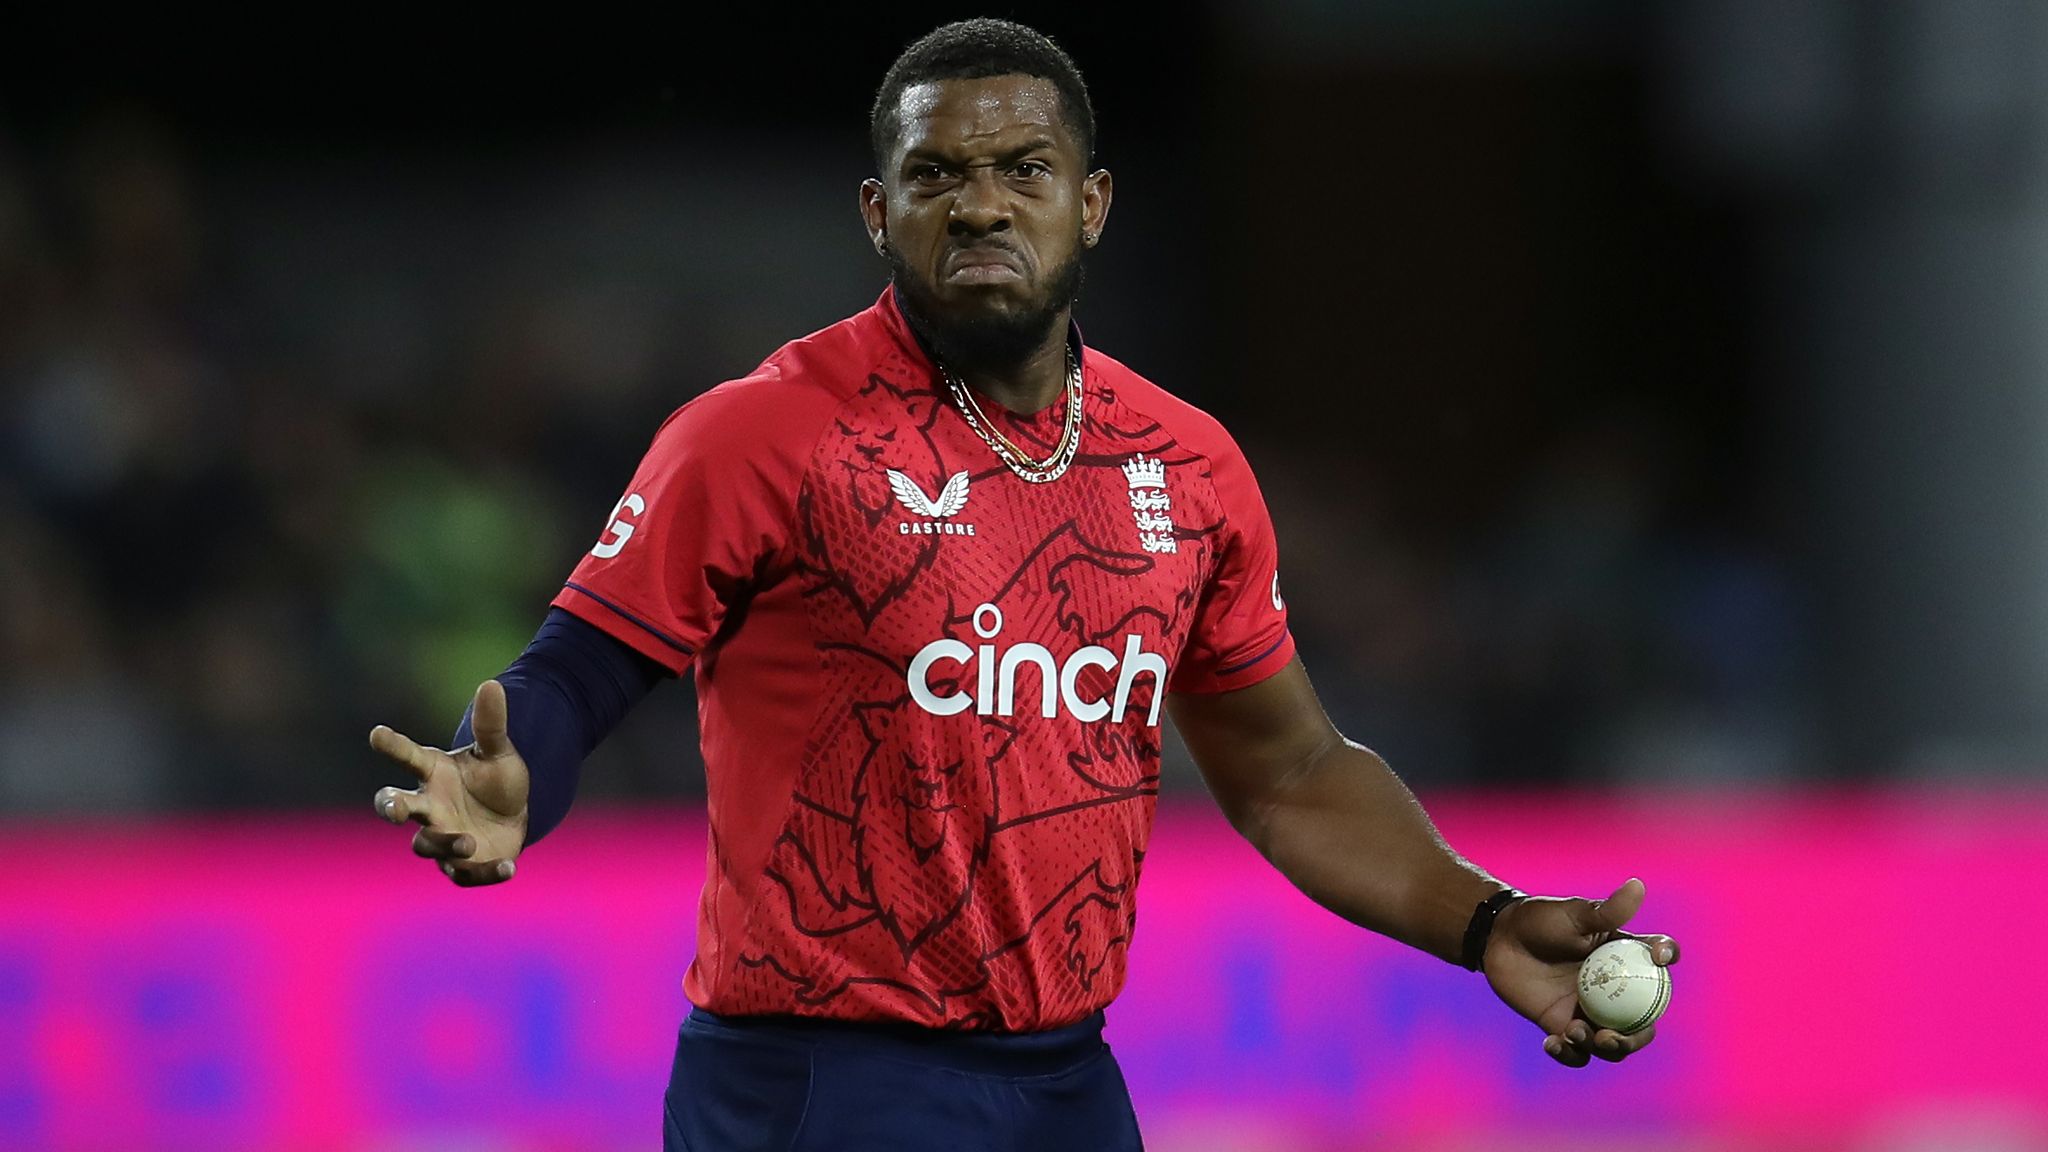 England beat South Africa in first T20 Eoin Morgan hailing Chris Jordan's vital over late on | Cricket News | Sky Sports